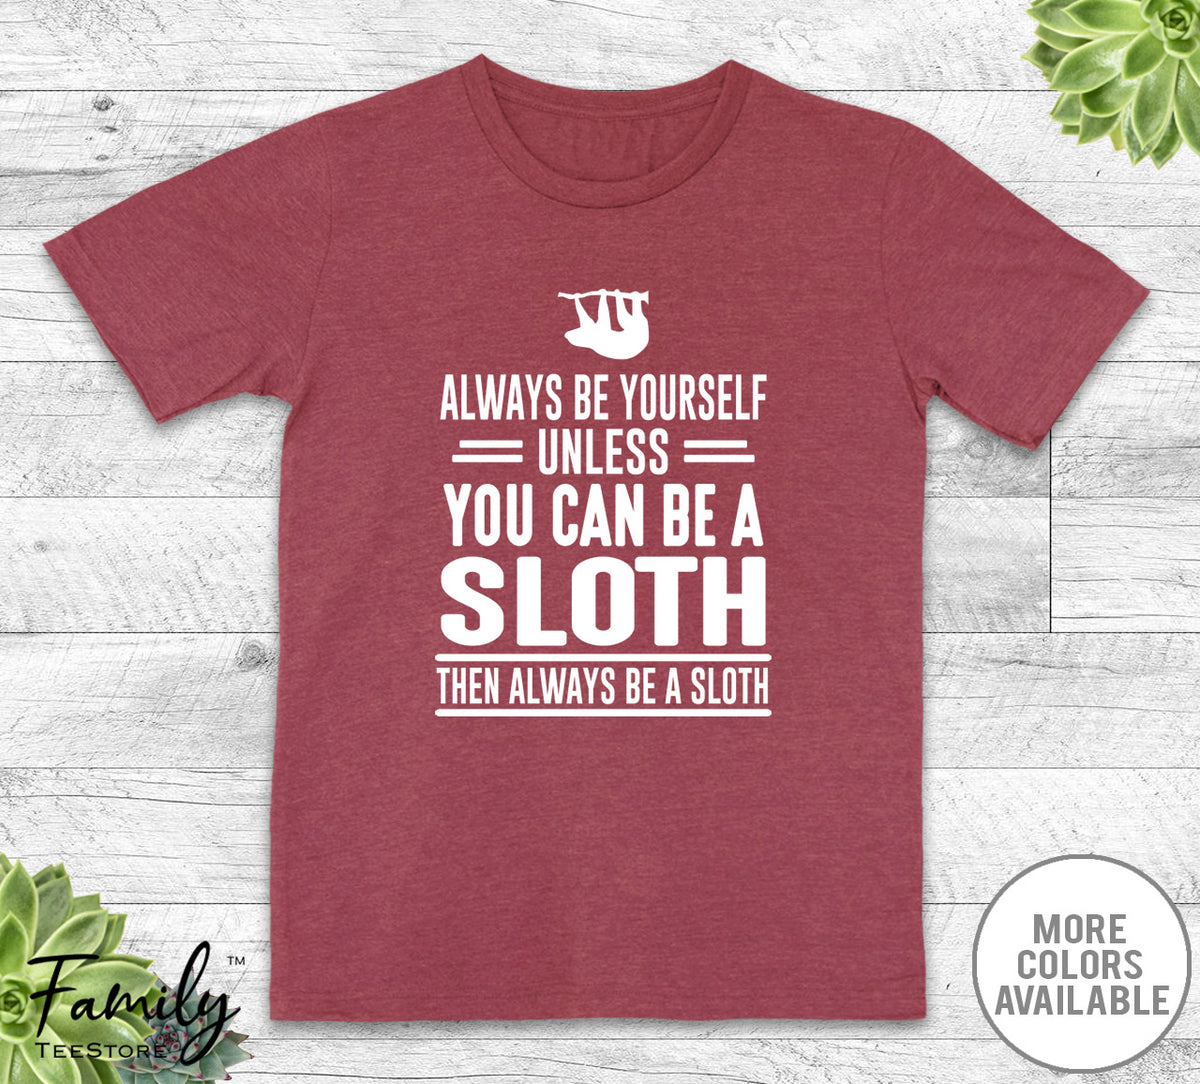 Always Be Yourself Unless You Can Be A Sloth - Unisex T-shirt - Sloth Shirt - Sloth Gift - familyteeprints